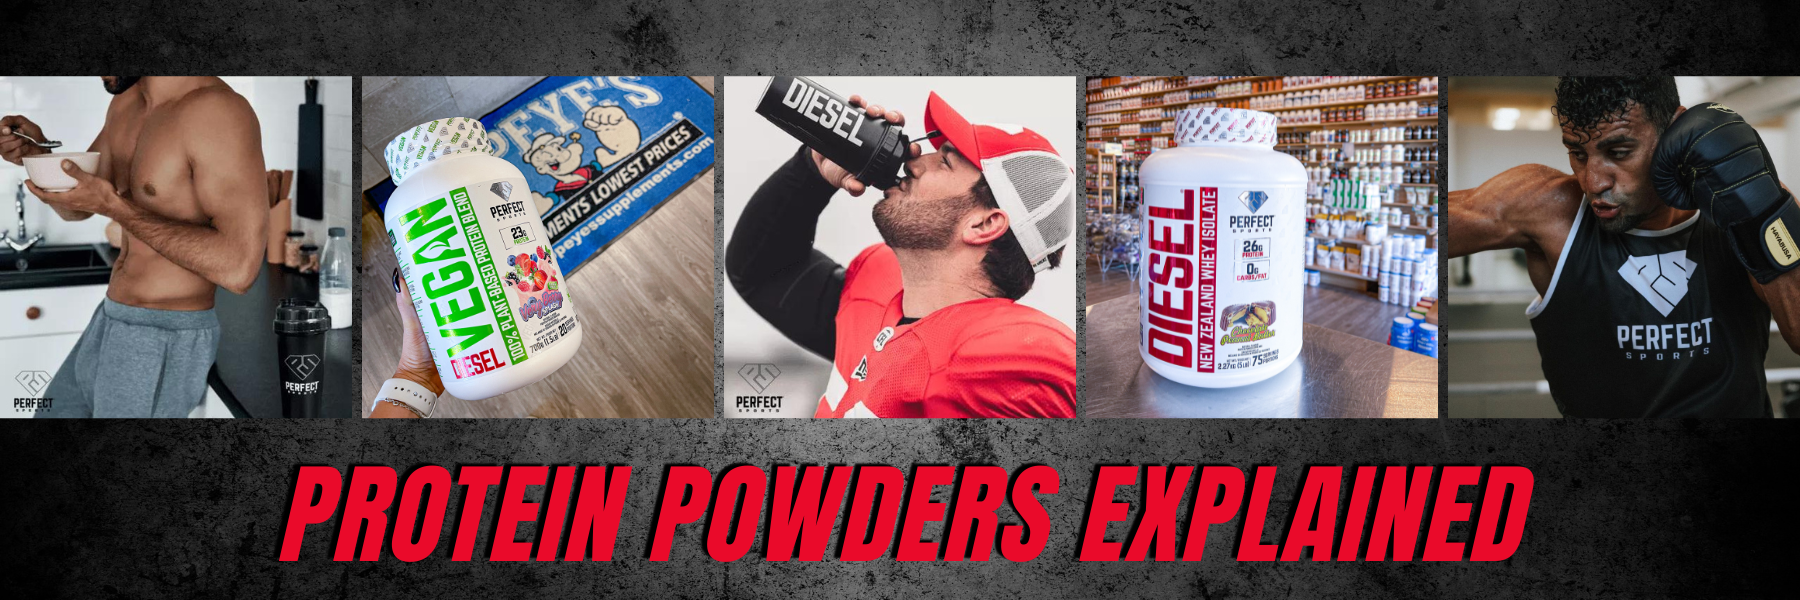 PROTEIN POWDERS EXPLAINED